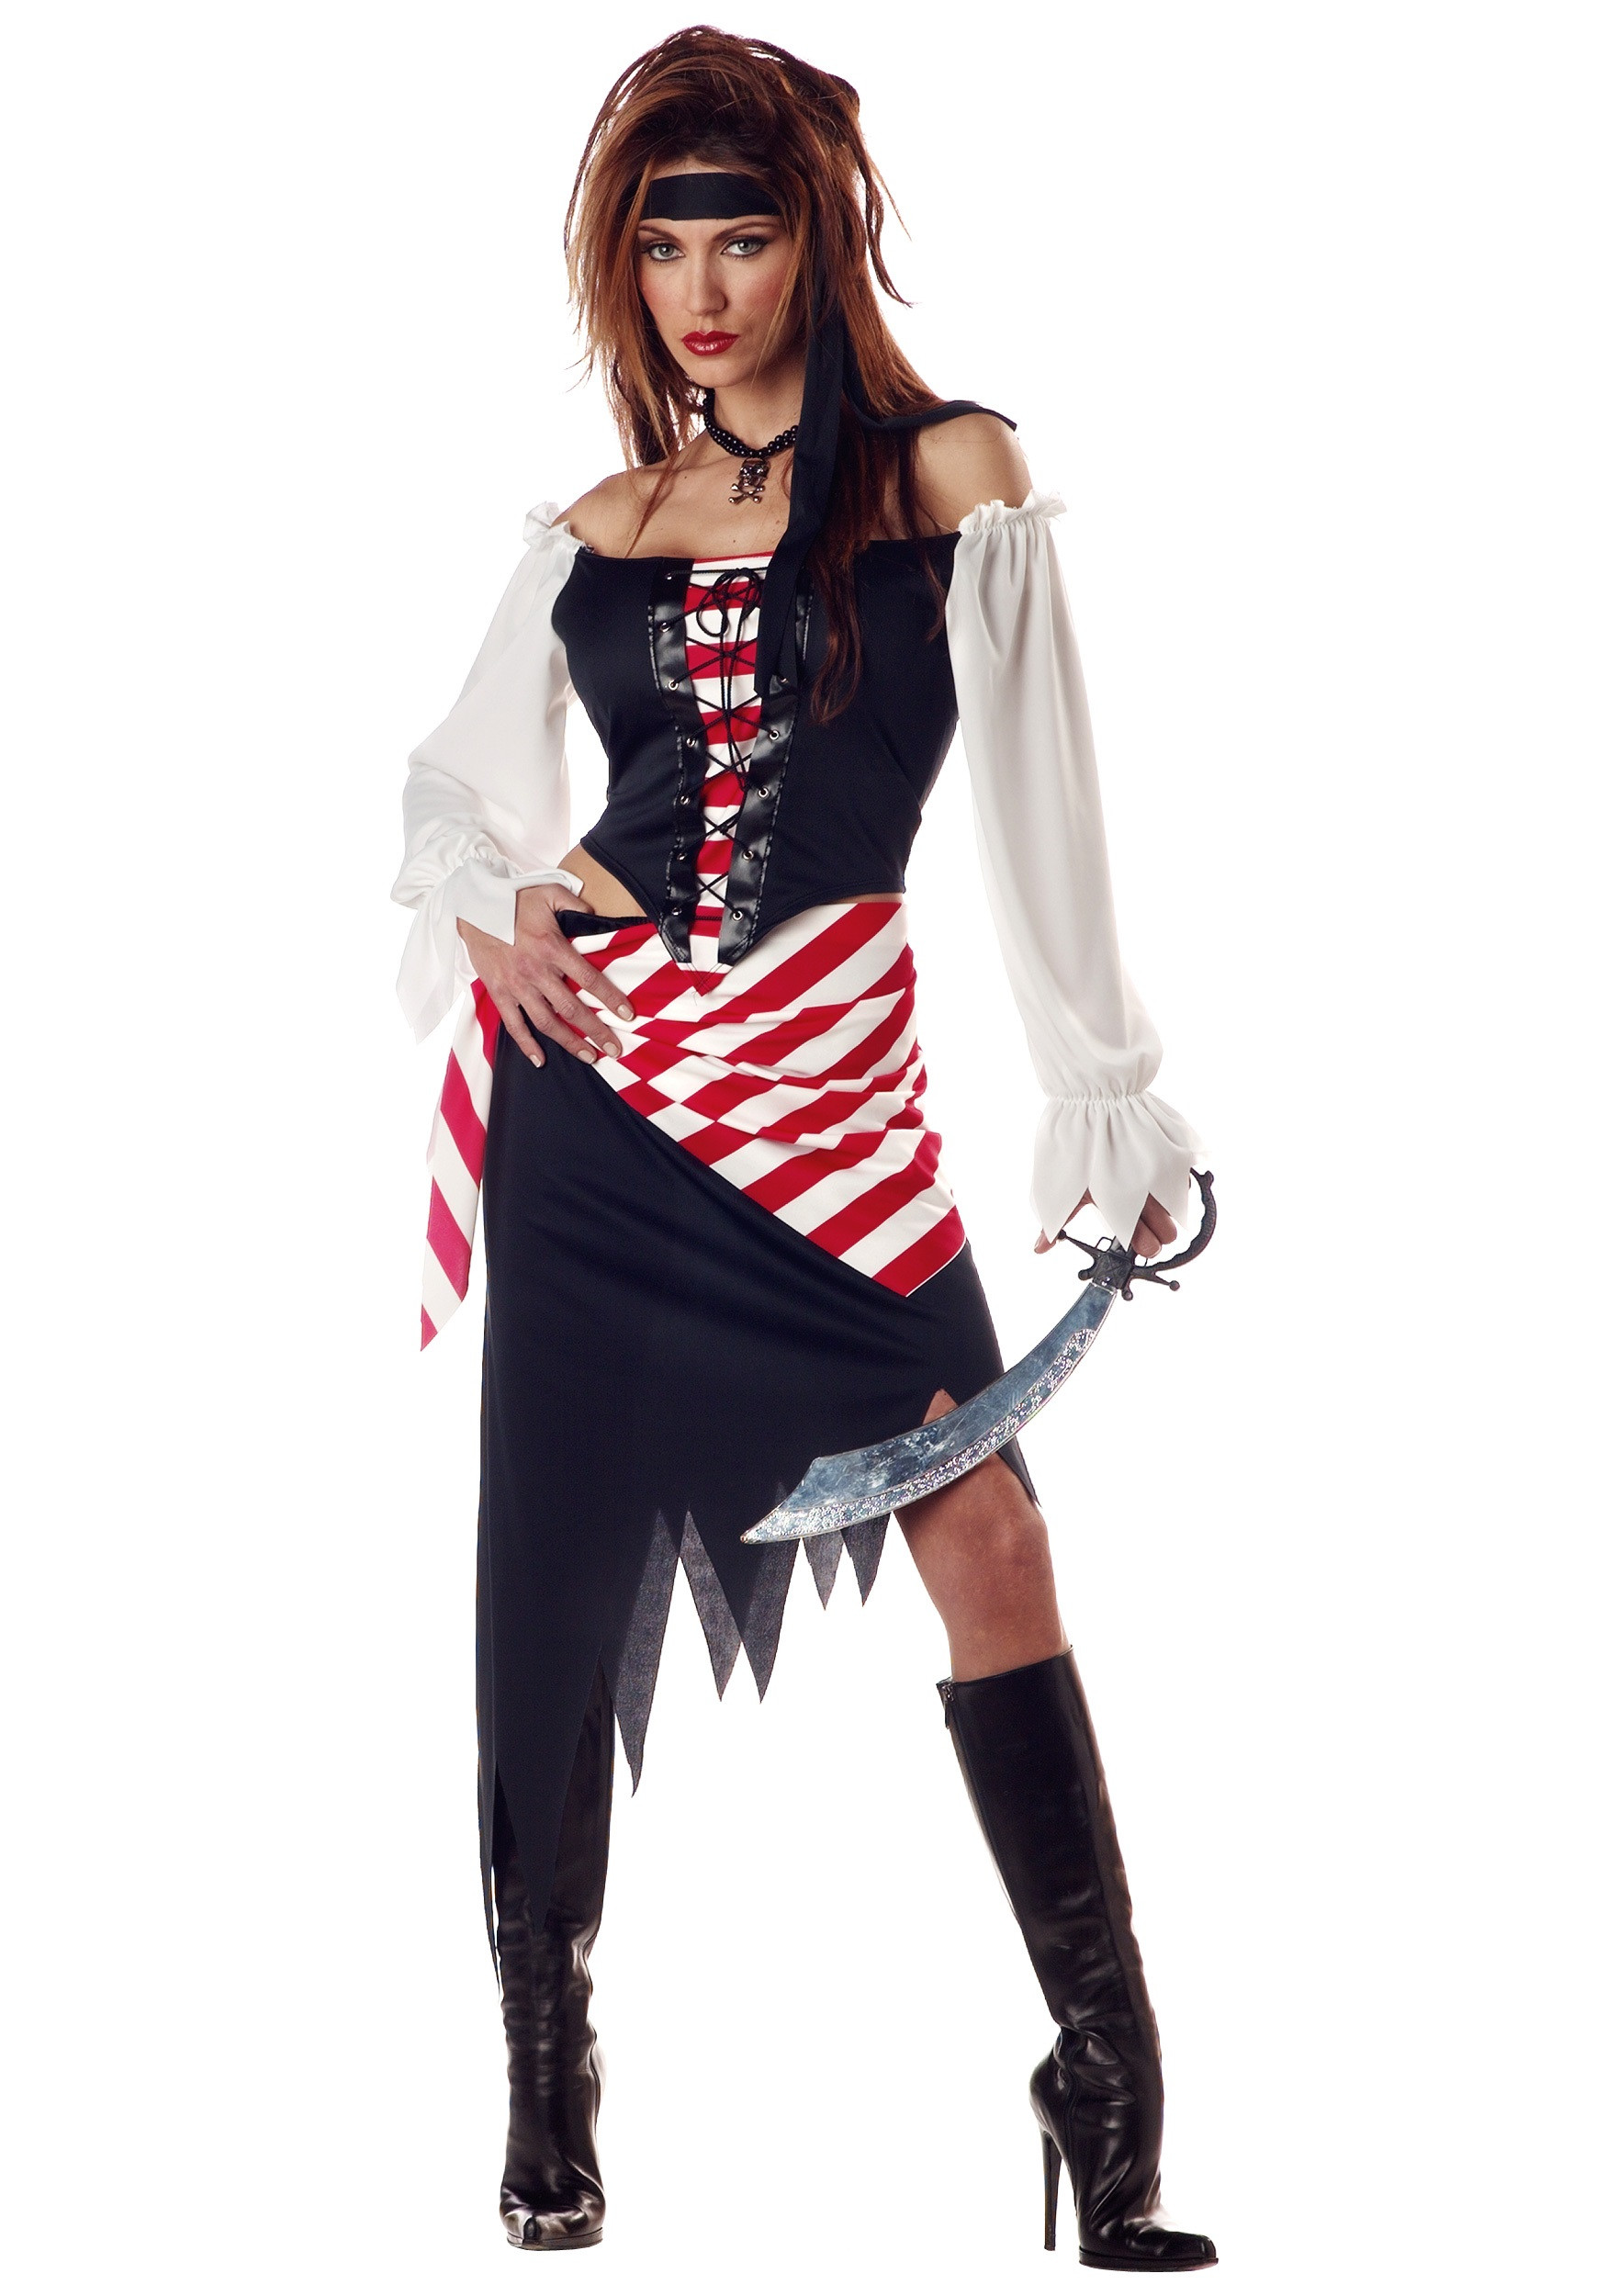 DIY Costumes Women
 Adult Ruby the Pirate Beauty Costume La s Pirate Costumes